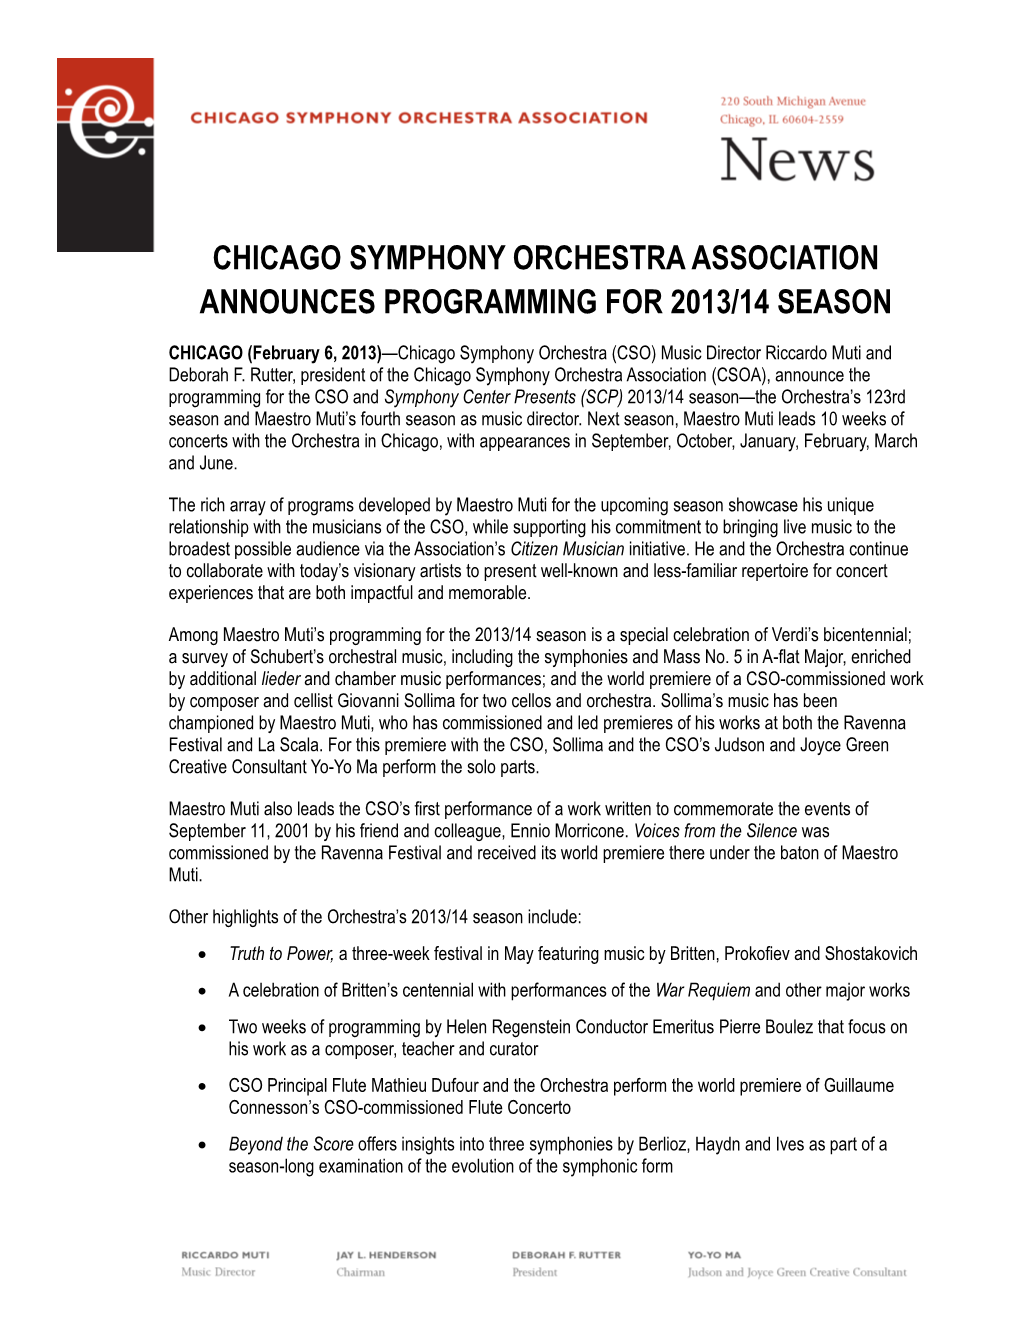 Chicago Symphony Orchestra Association Announces Programming for 2013/14 Season